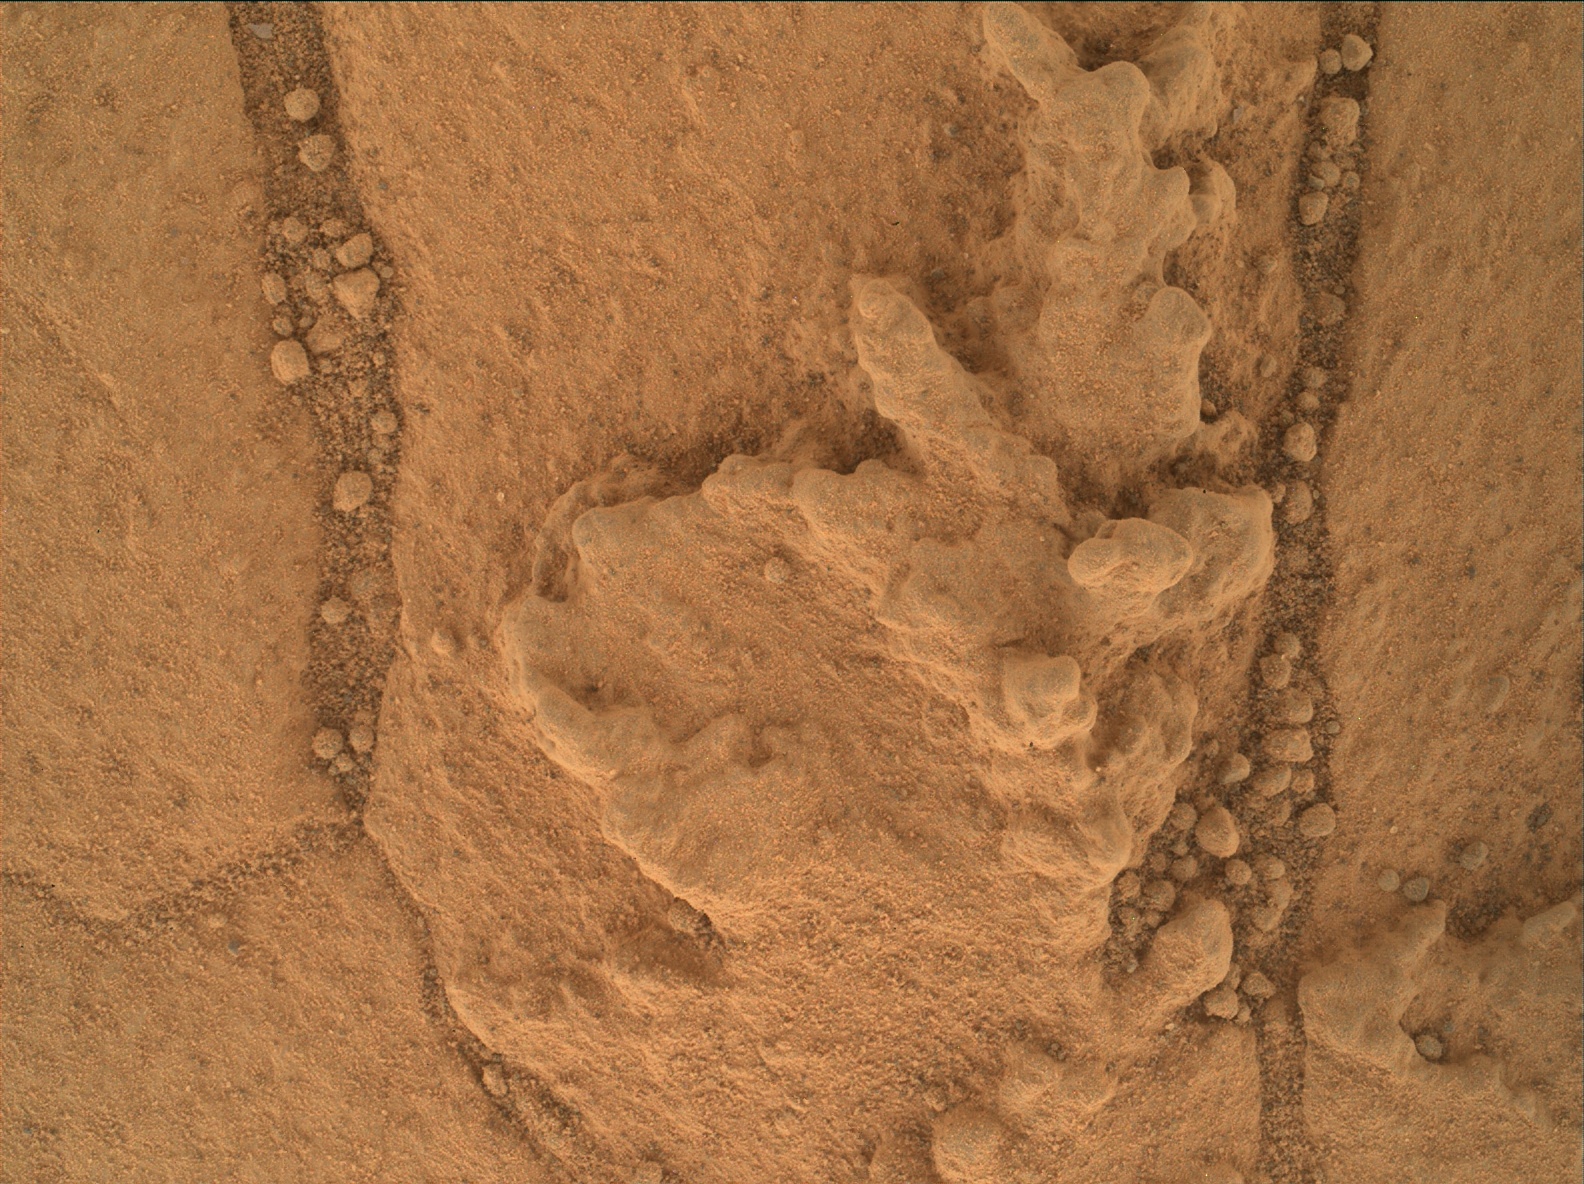 Nasa's Mars rover Curiosity acquired this image using its Mars Hand Lens Imager (MAHLI) on Sol 758